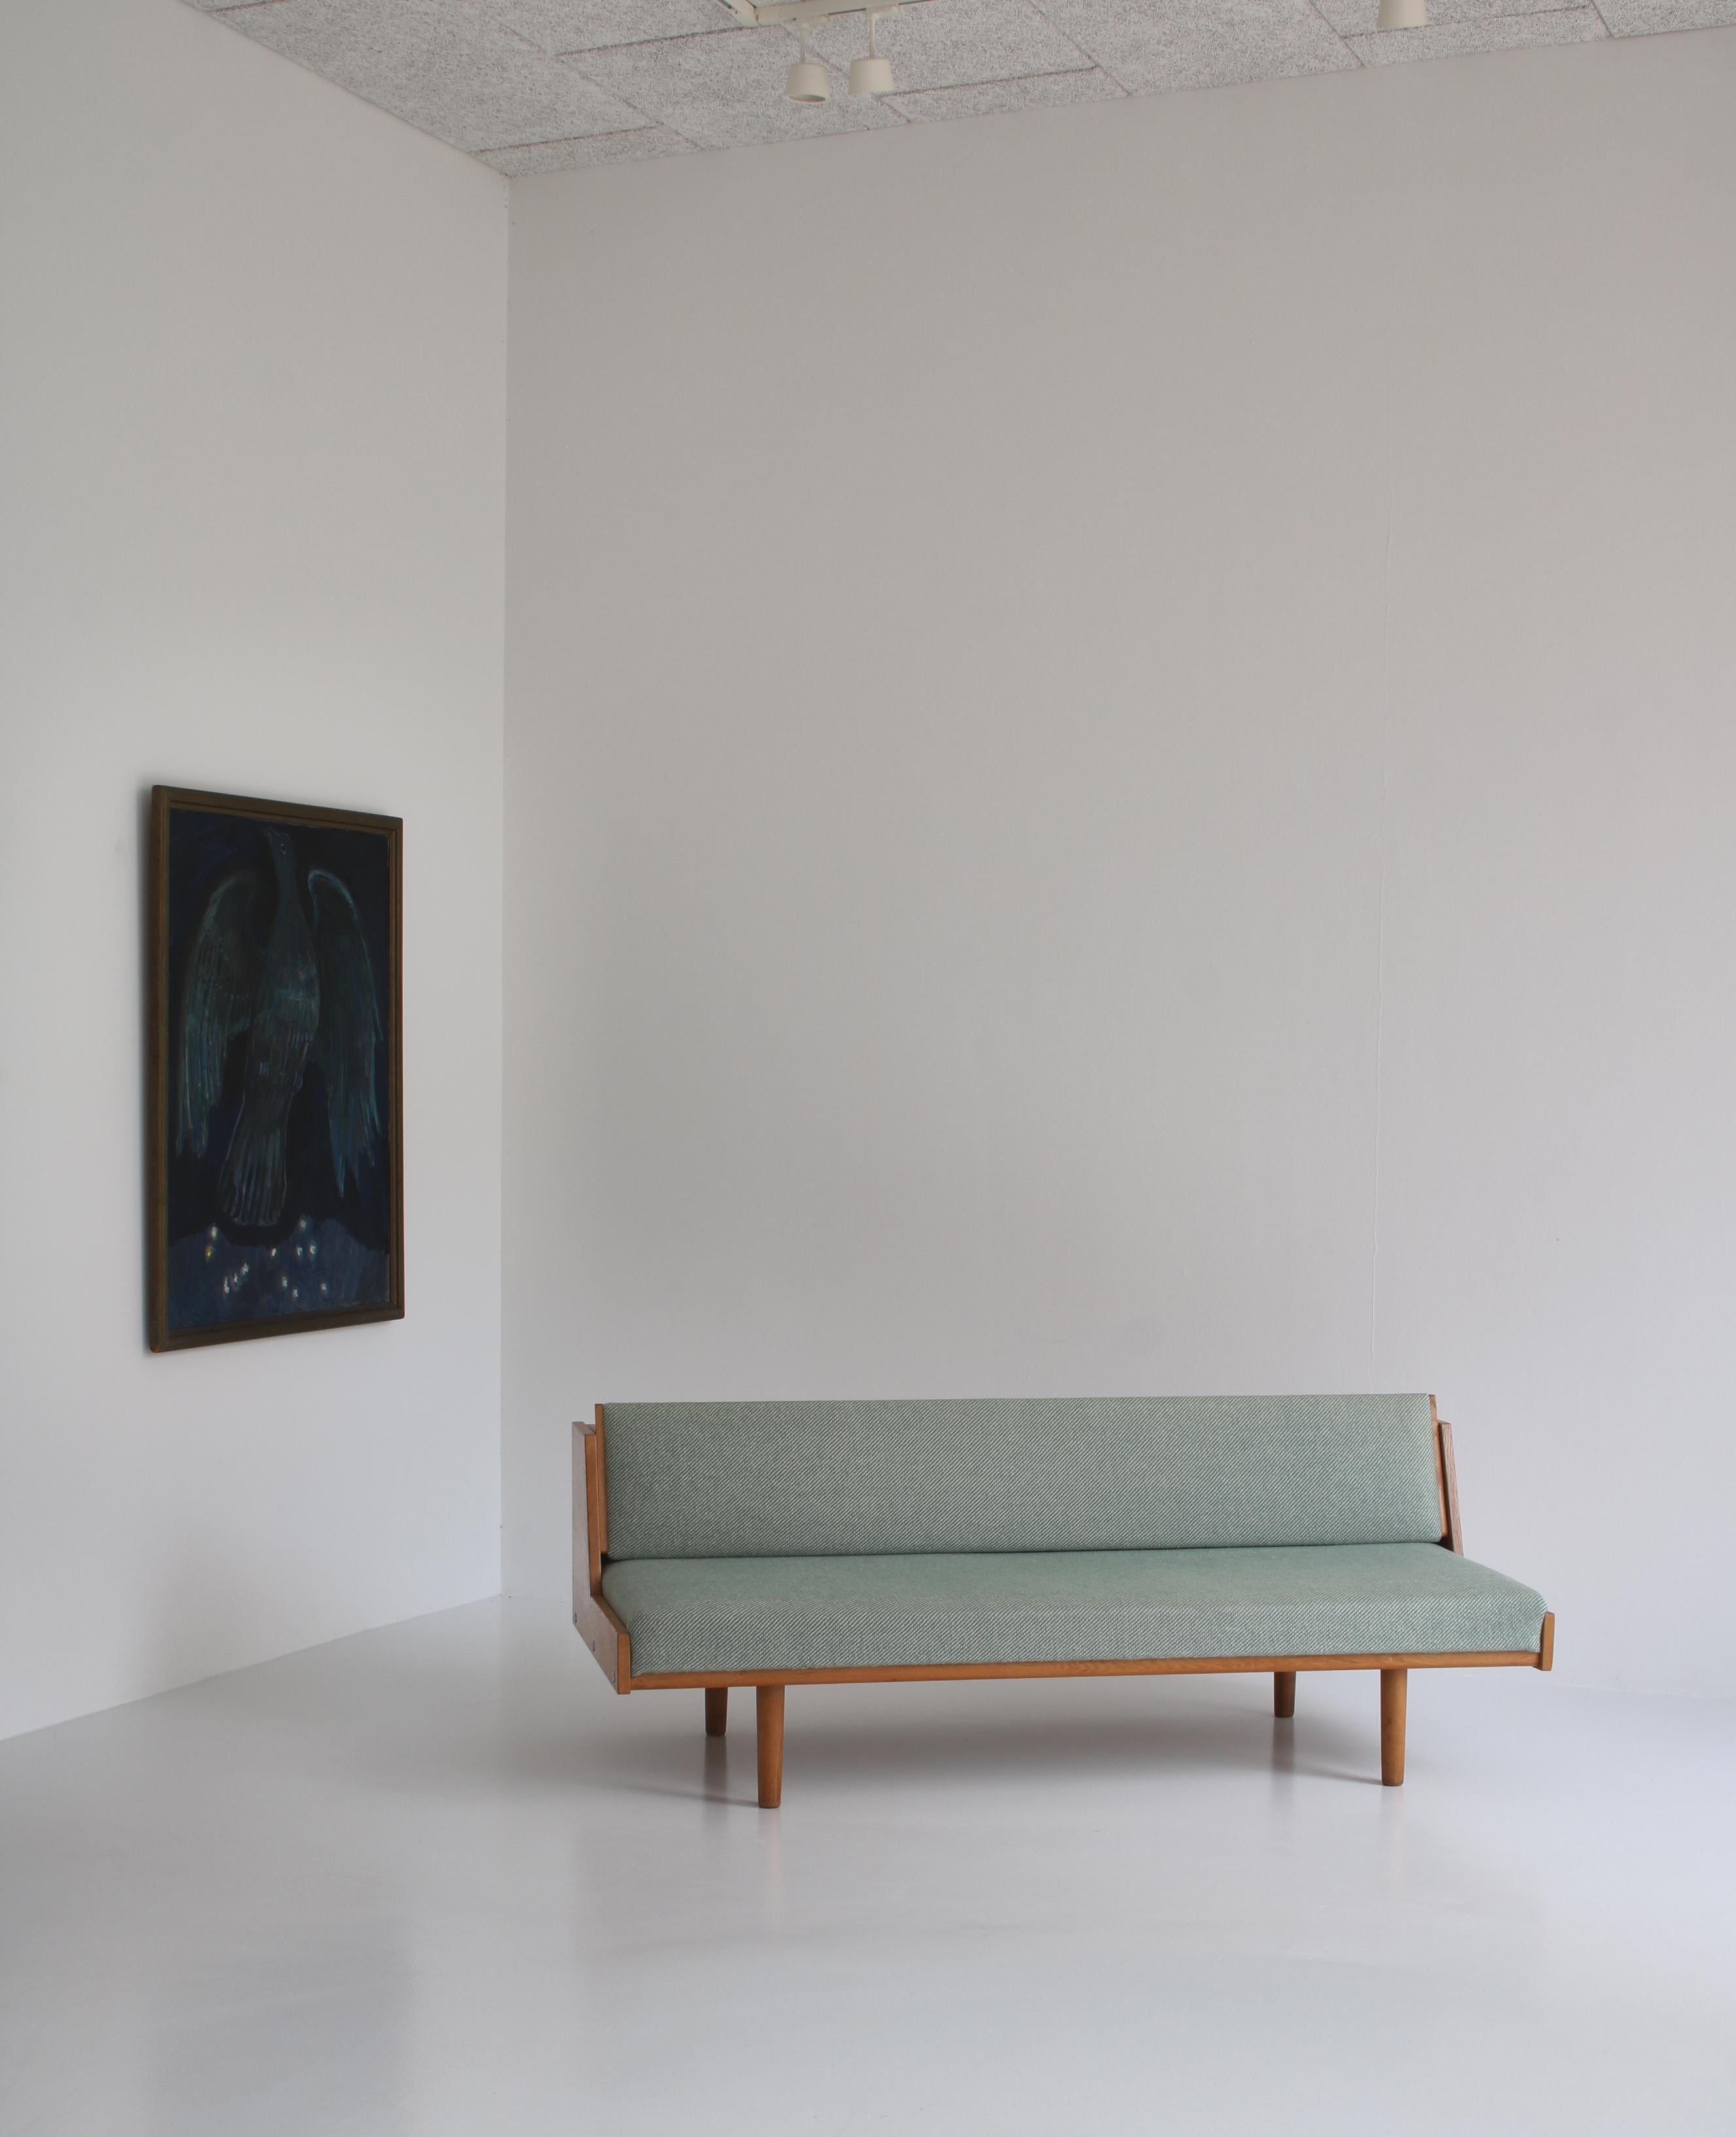 Designed by Hans Wegner for GETAMA this convertible daybed / sofa features a beautifully patinated oak frame and wool upholstery. The back reveals a hidden space for blankets, pillows etc. The model GE-258 was designed by Wegner in the early